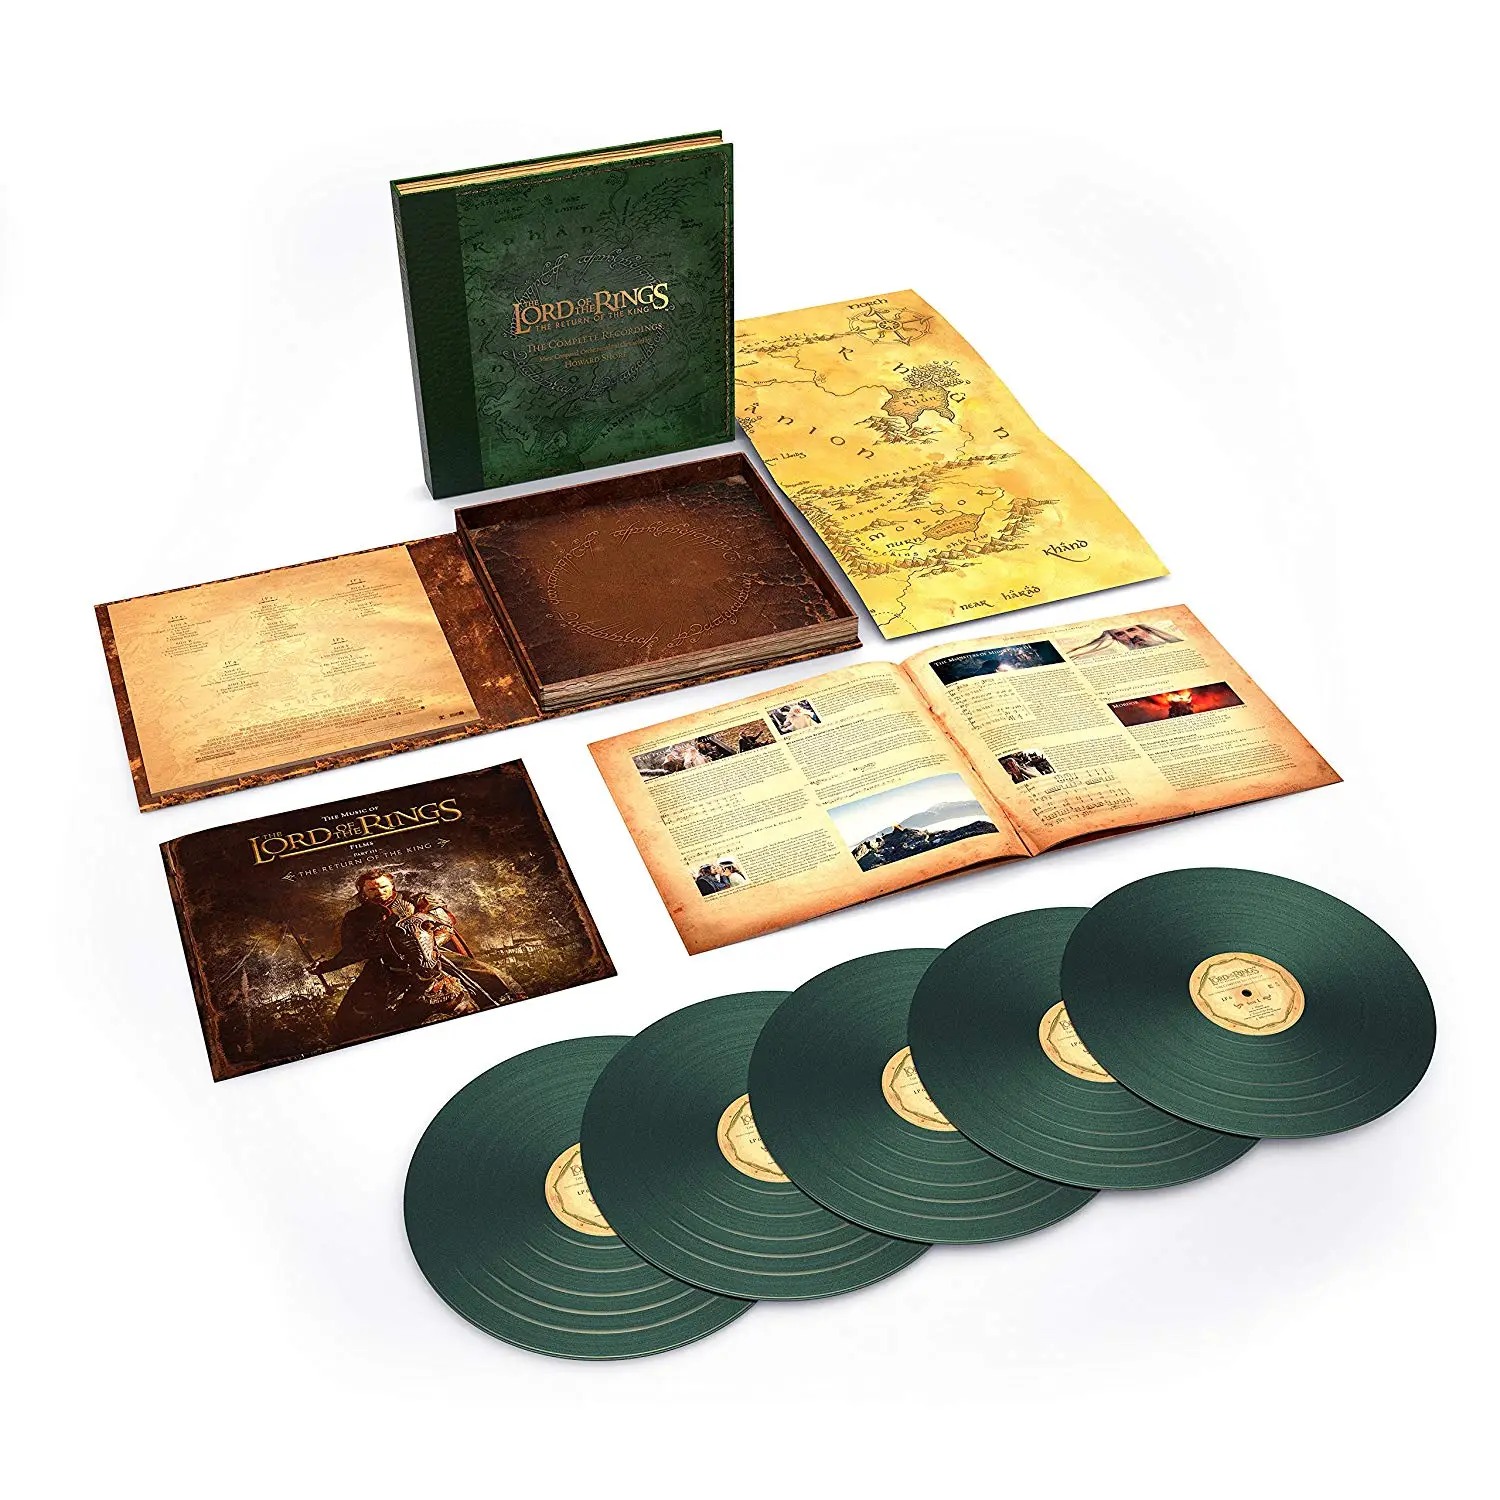 Coffret Vinyle The Lord Of The Rings: The return of the King - Coffret 6LP Edition Limitée]